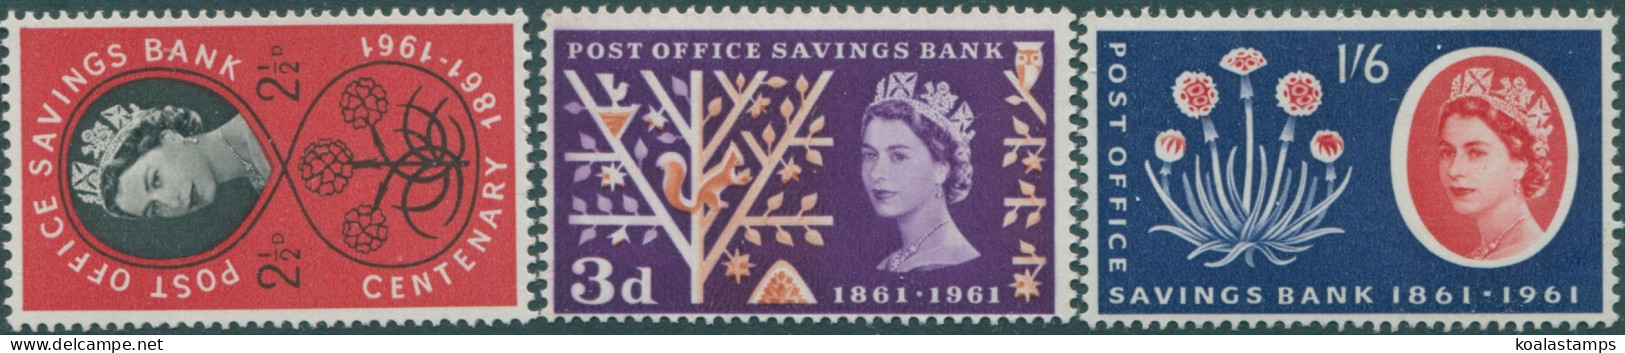 Great Britain 1961 SG623A-625A QEII Post Office Savings Bank Set MNH - Unclassified